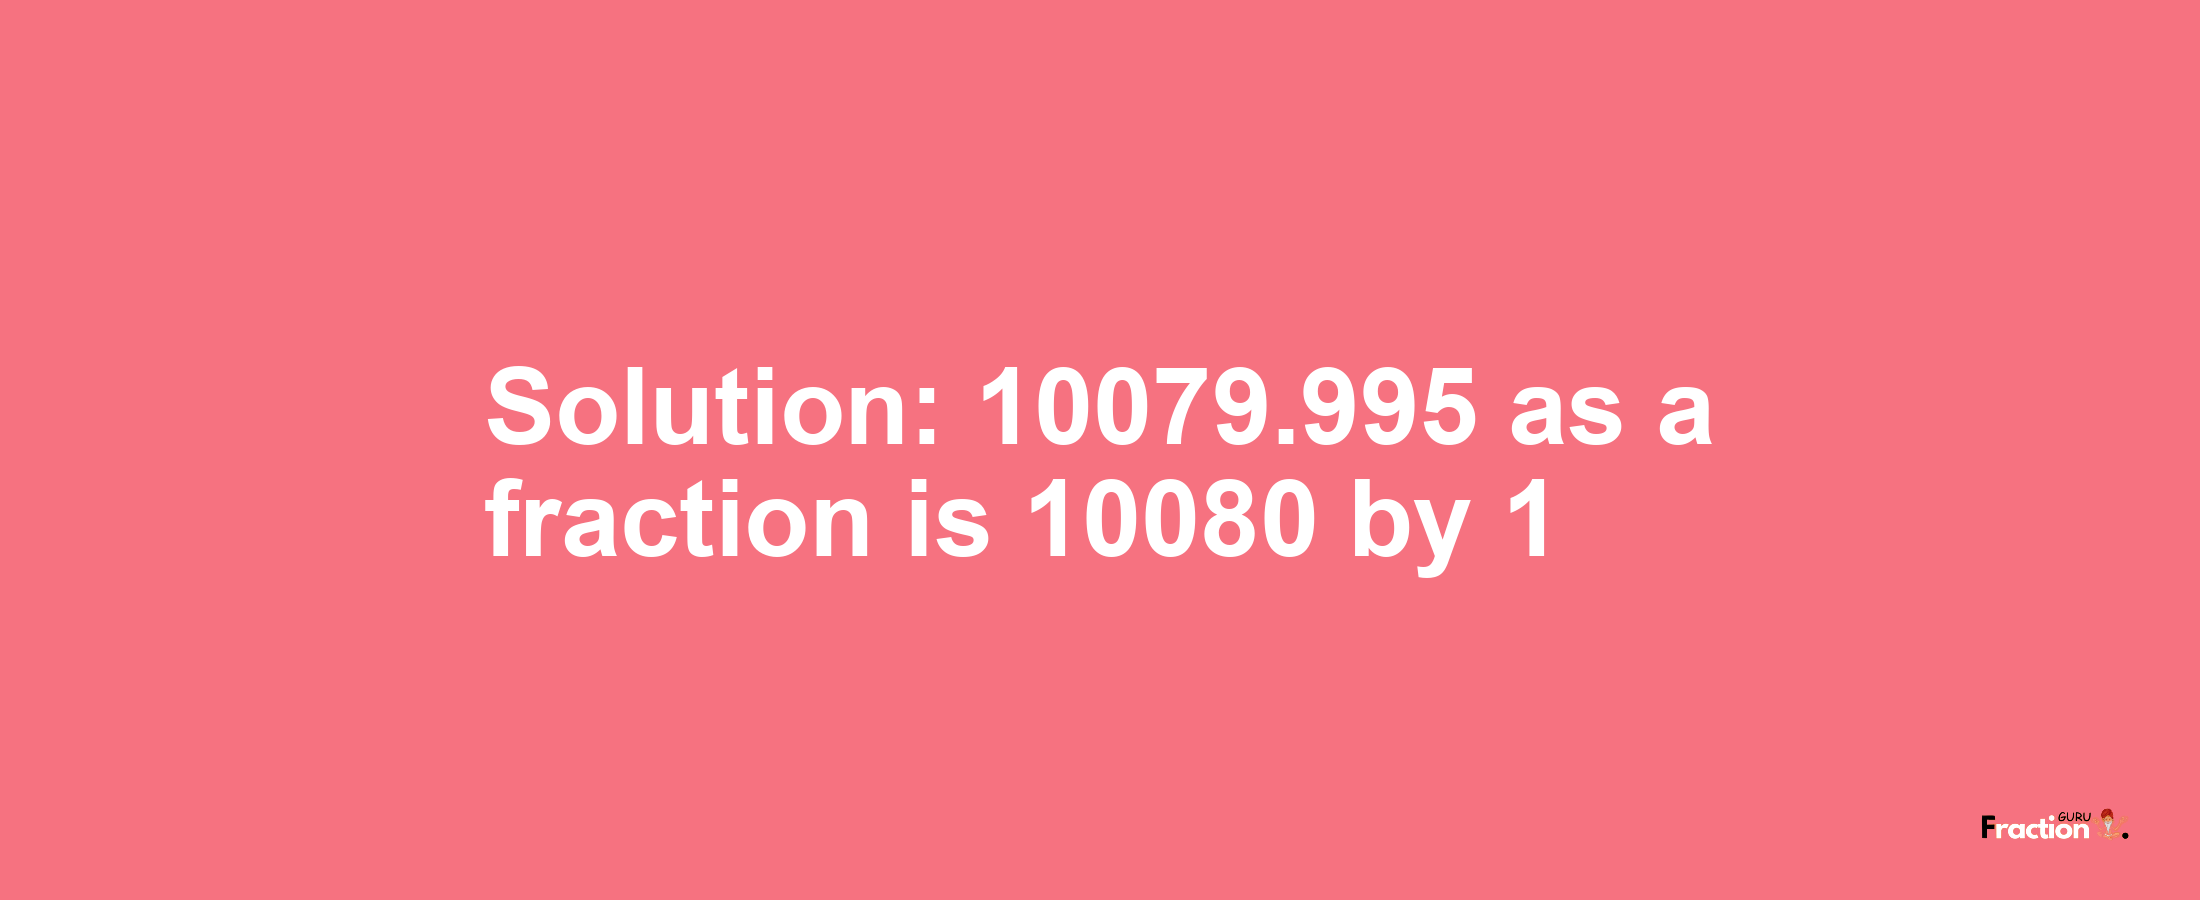 Solution:10079.995 as a fraction is 10080/1